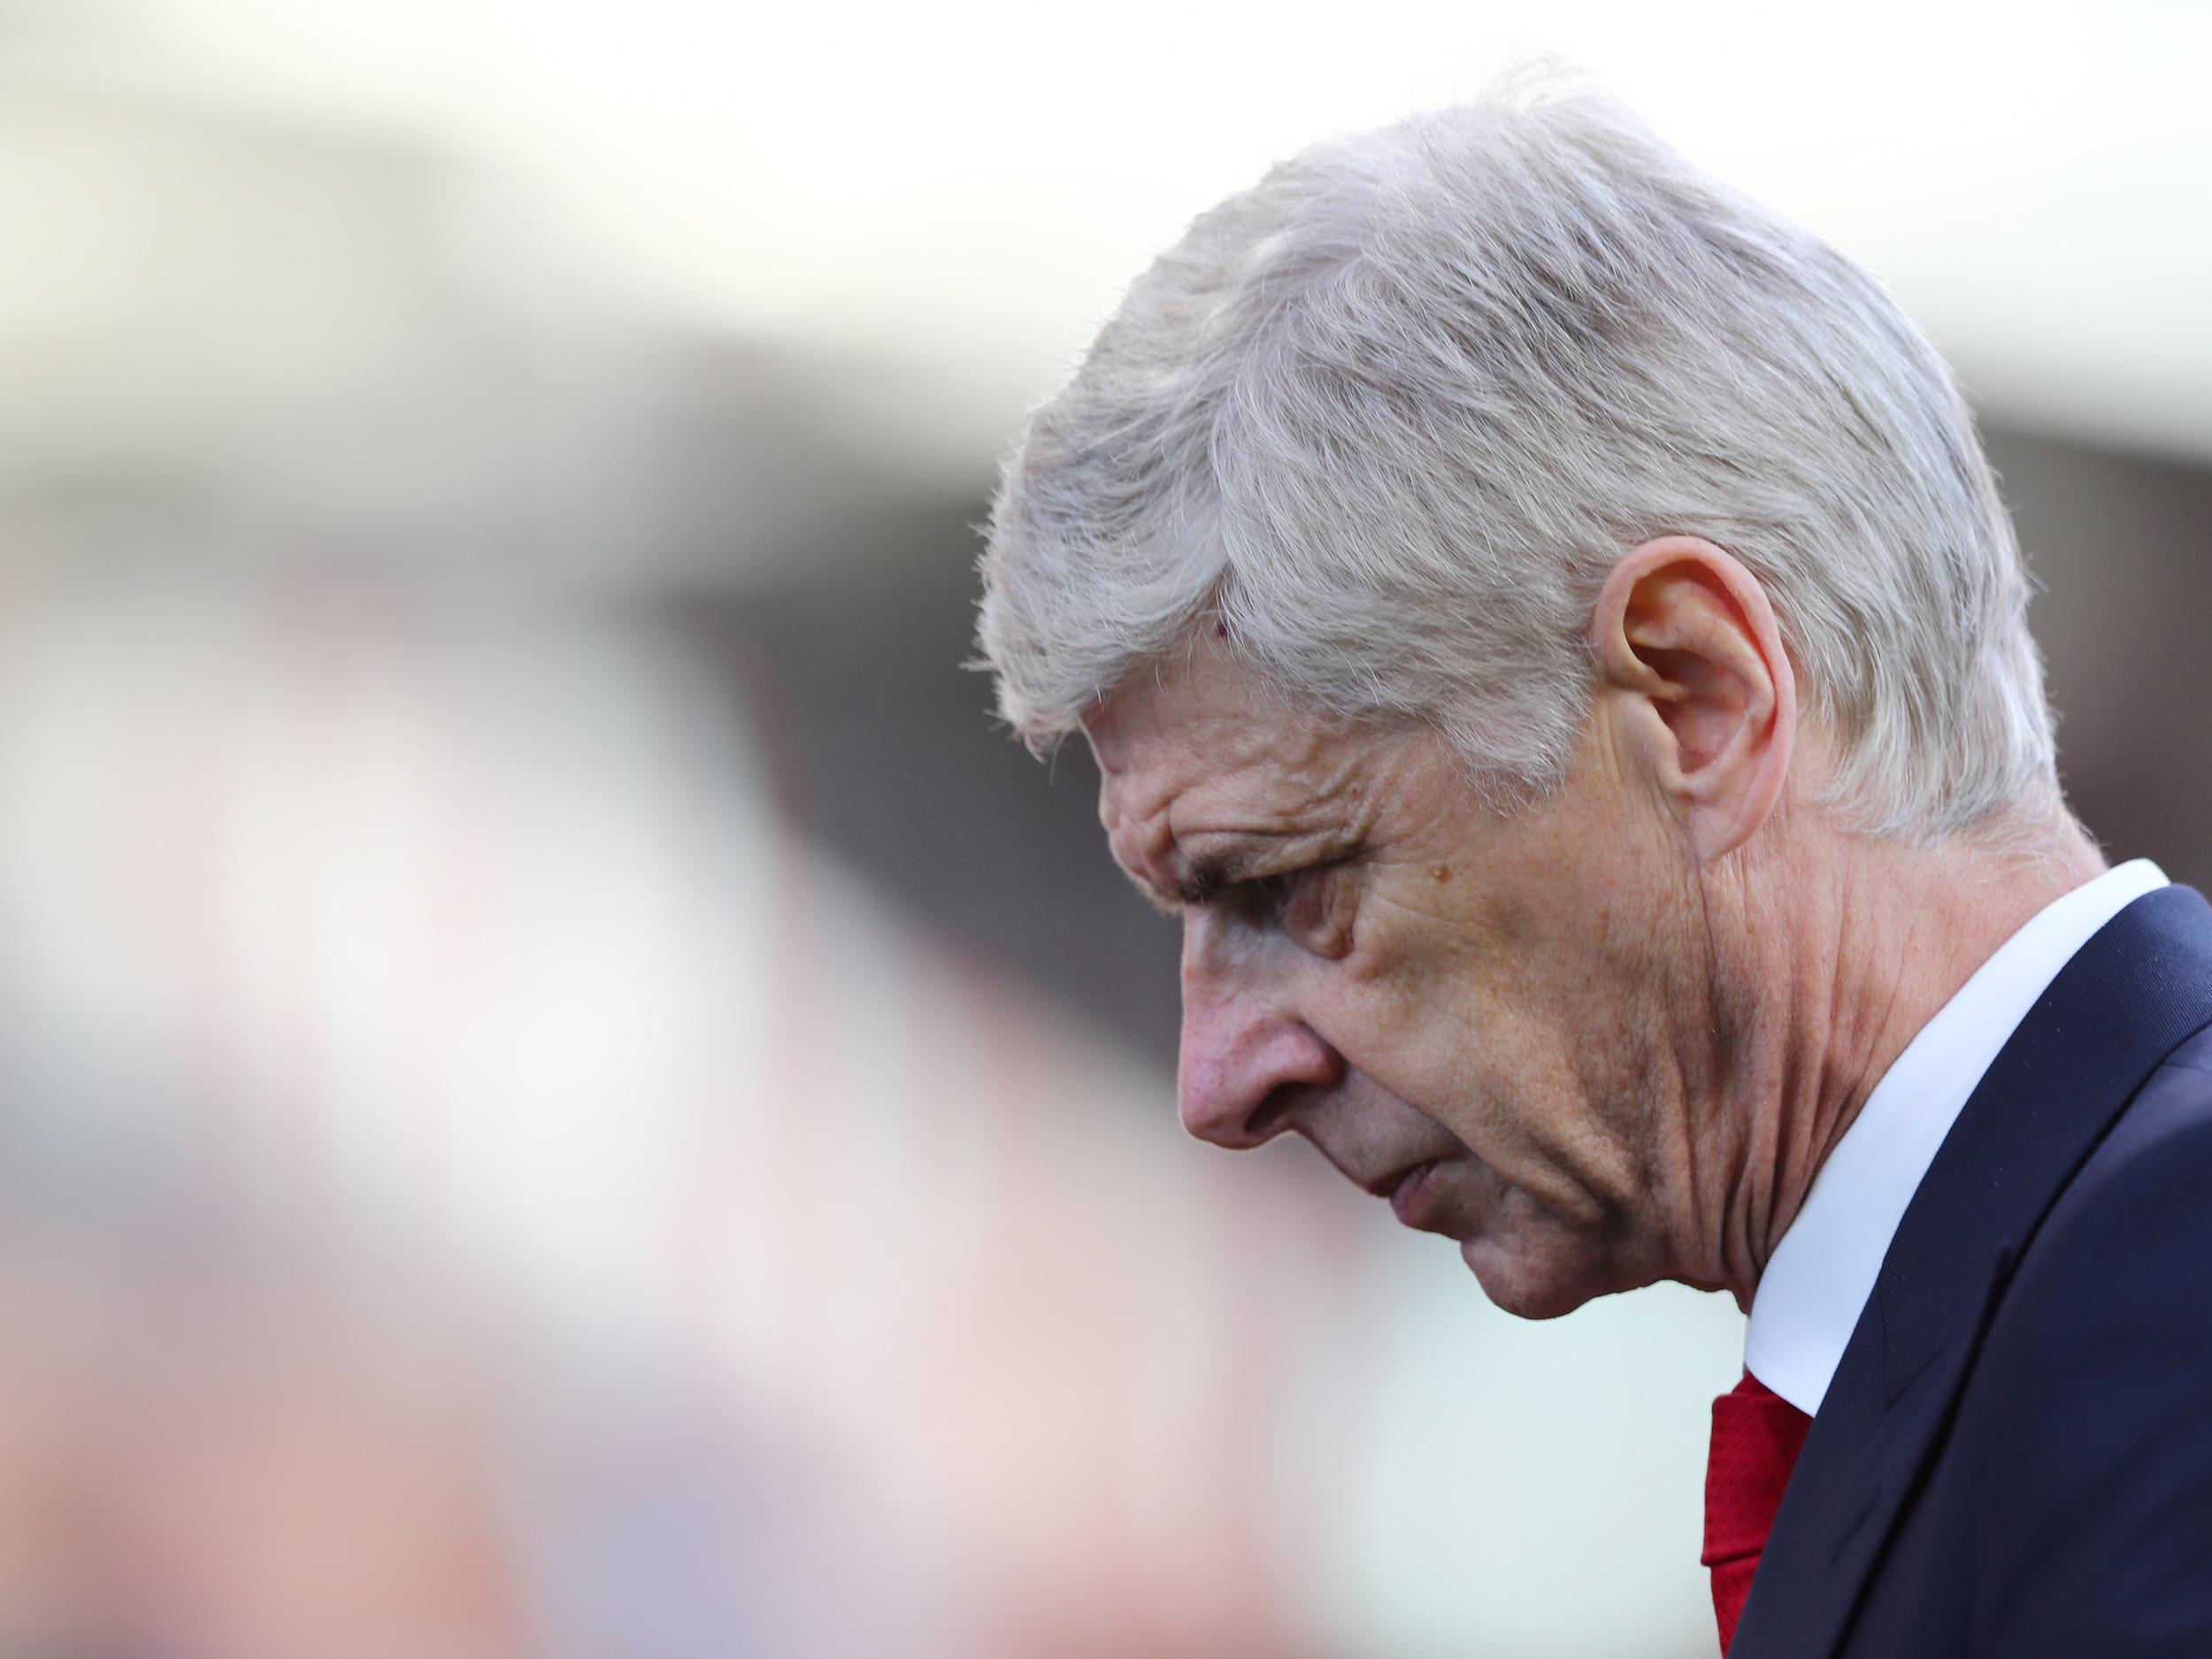 Wenger's contract expires at the end of the season